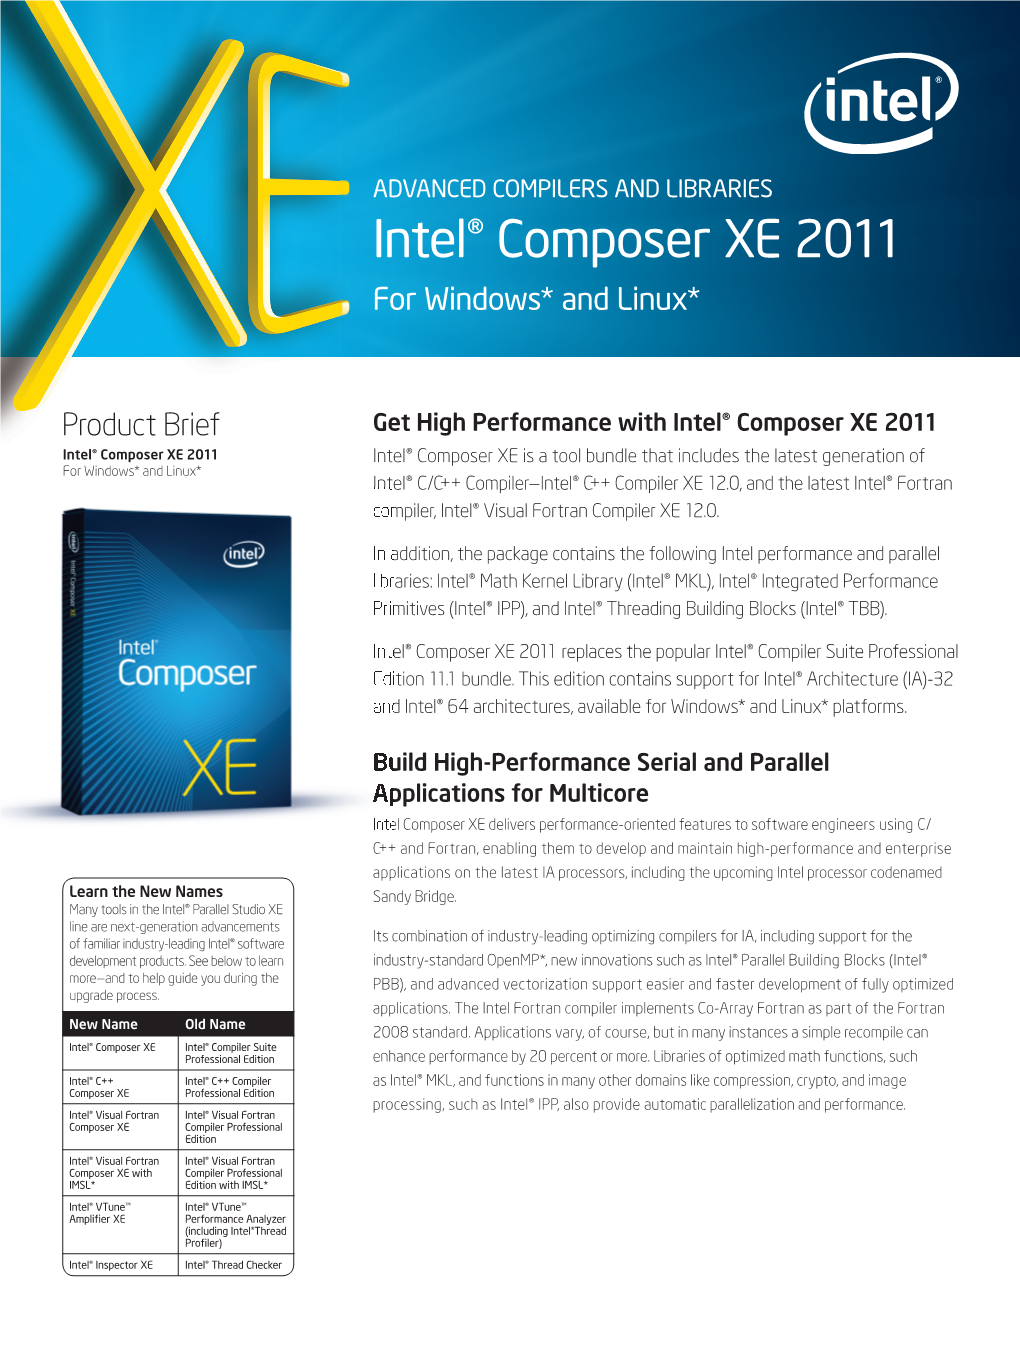 Intel® Composer XE 2011 for Windows* and Linux*